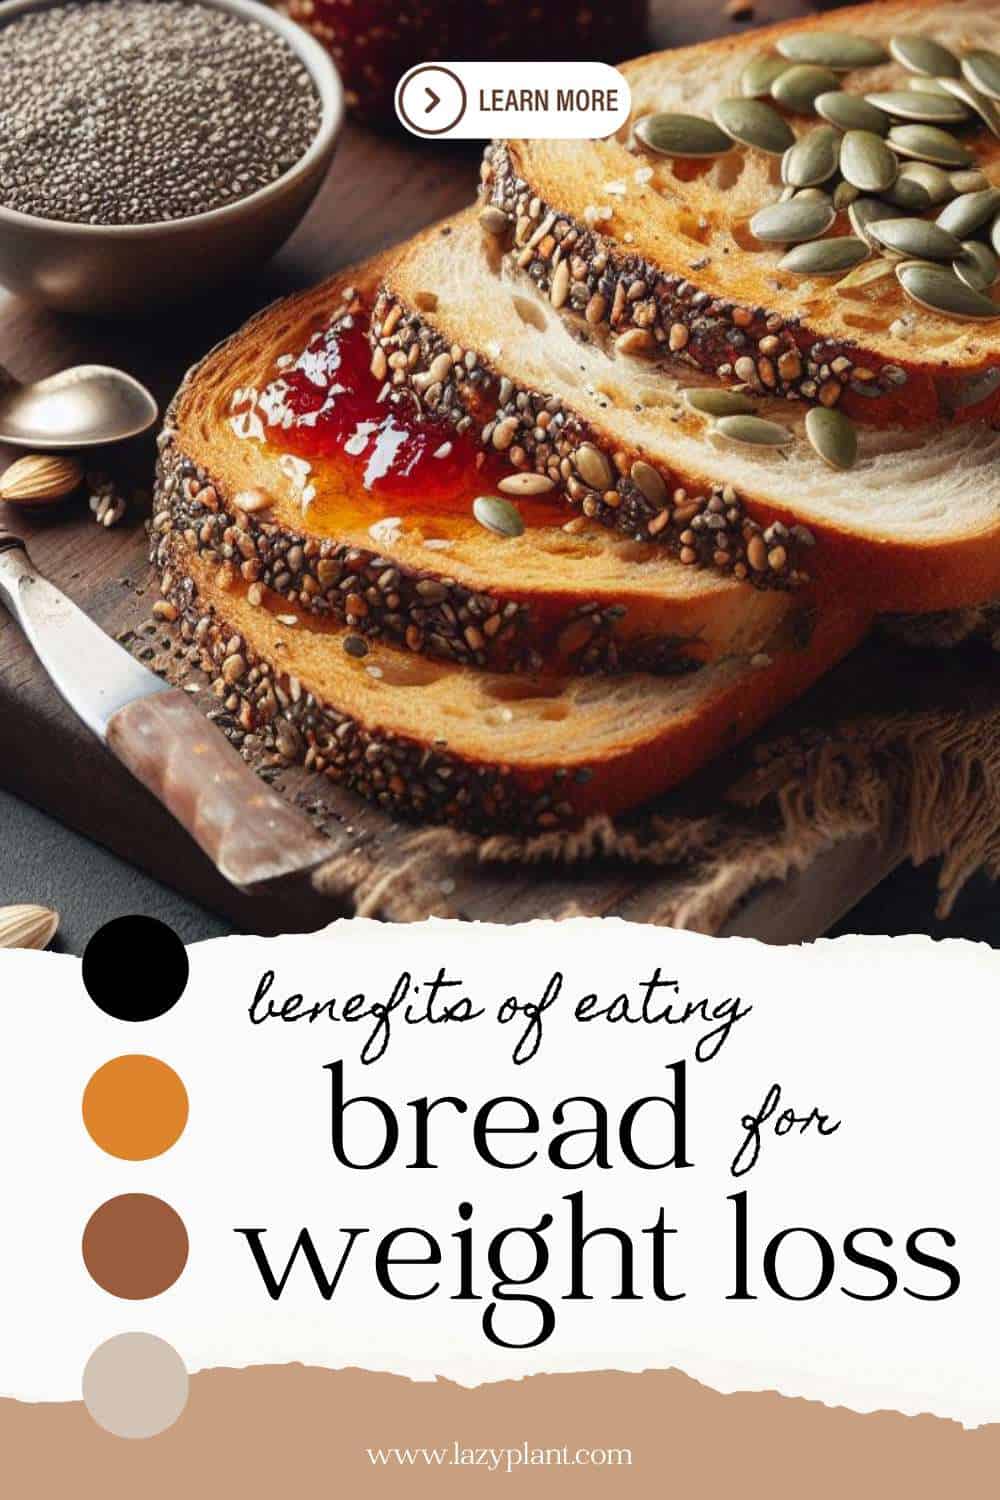 How to eat bread so as not to gain weight?